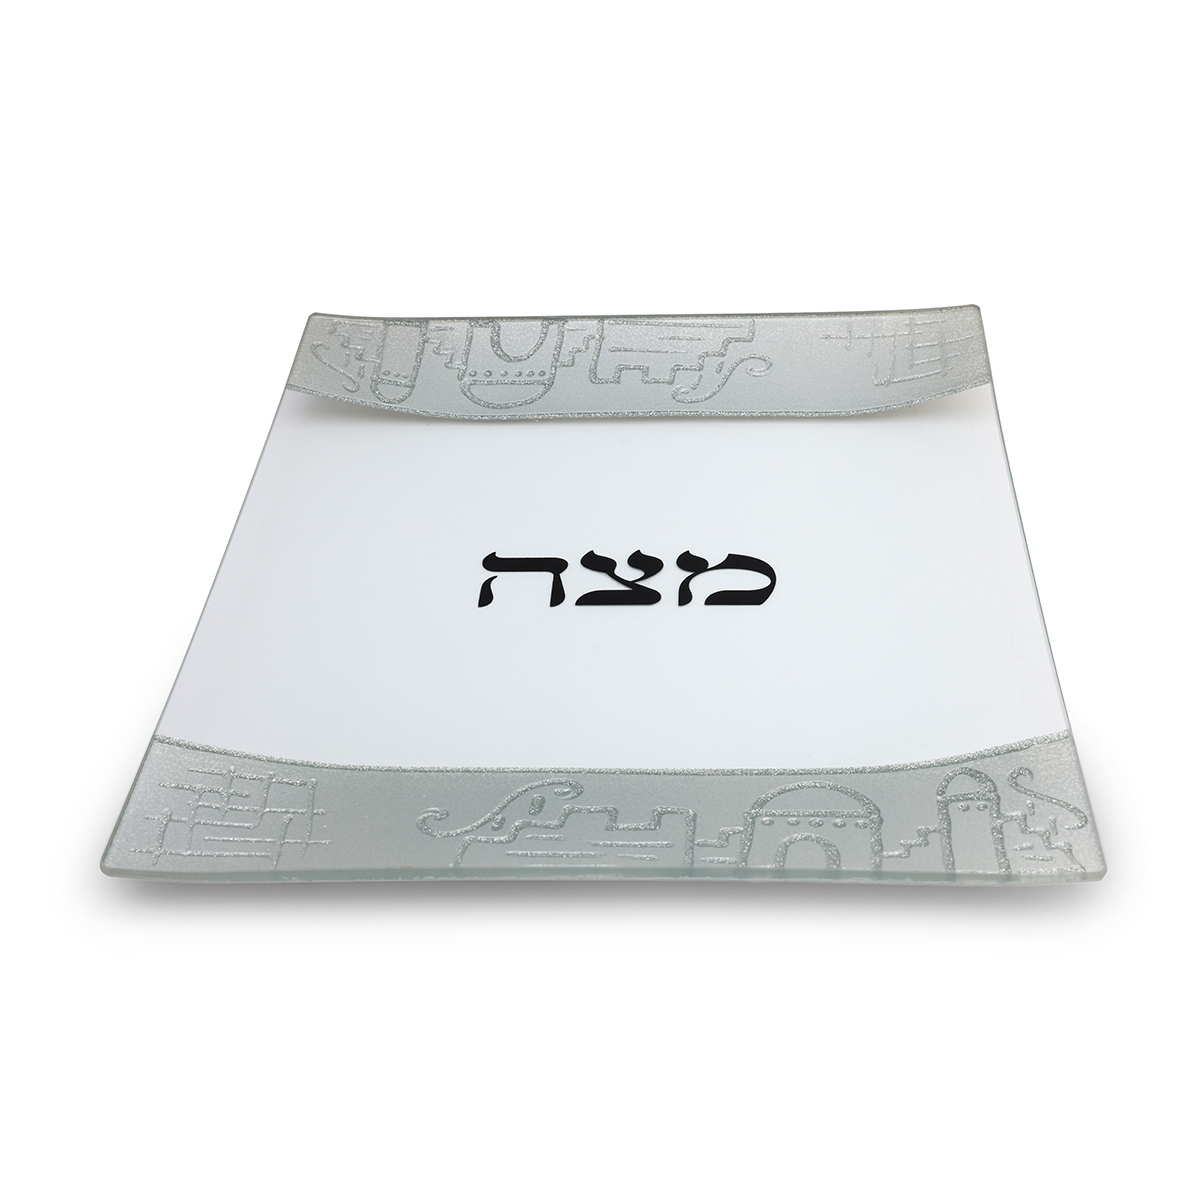 Made in Israel Handmade Glass Matzah Plate for Passover 